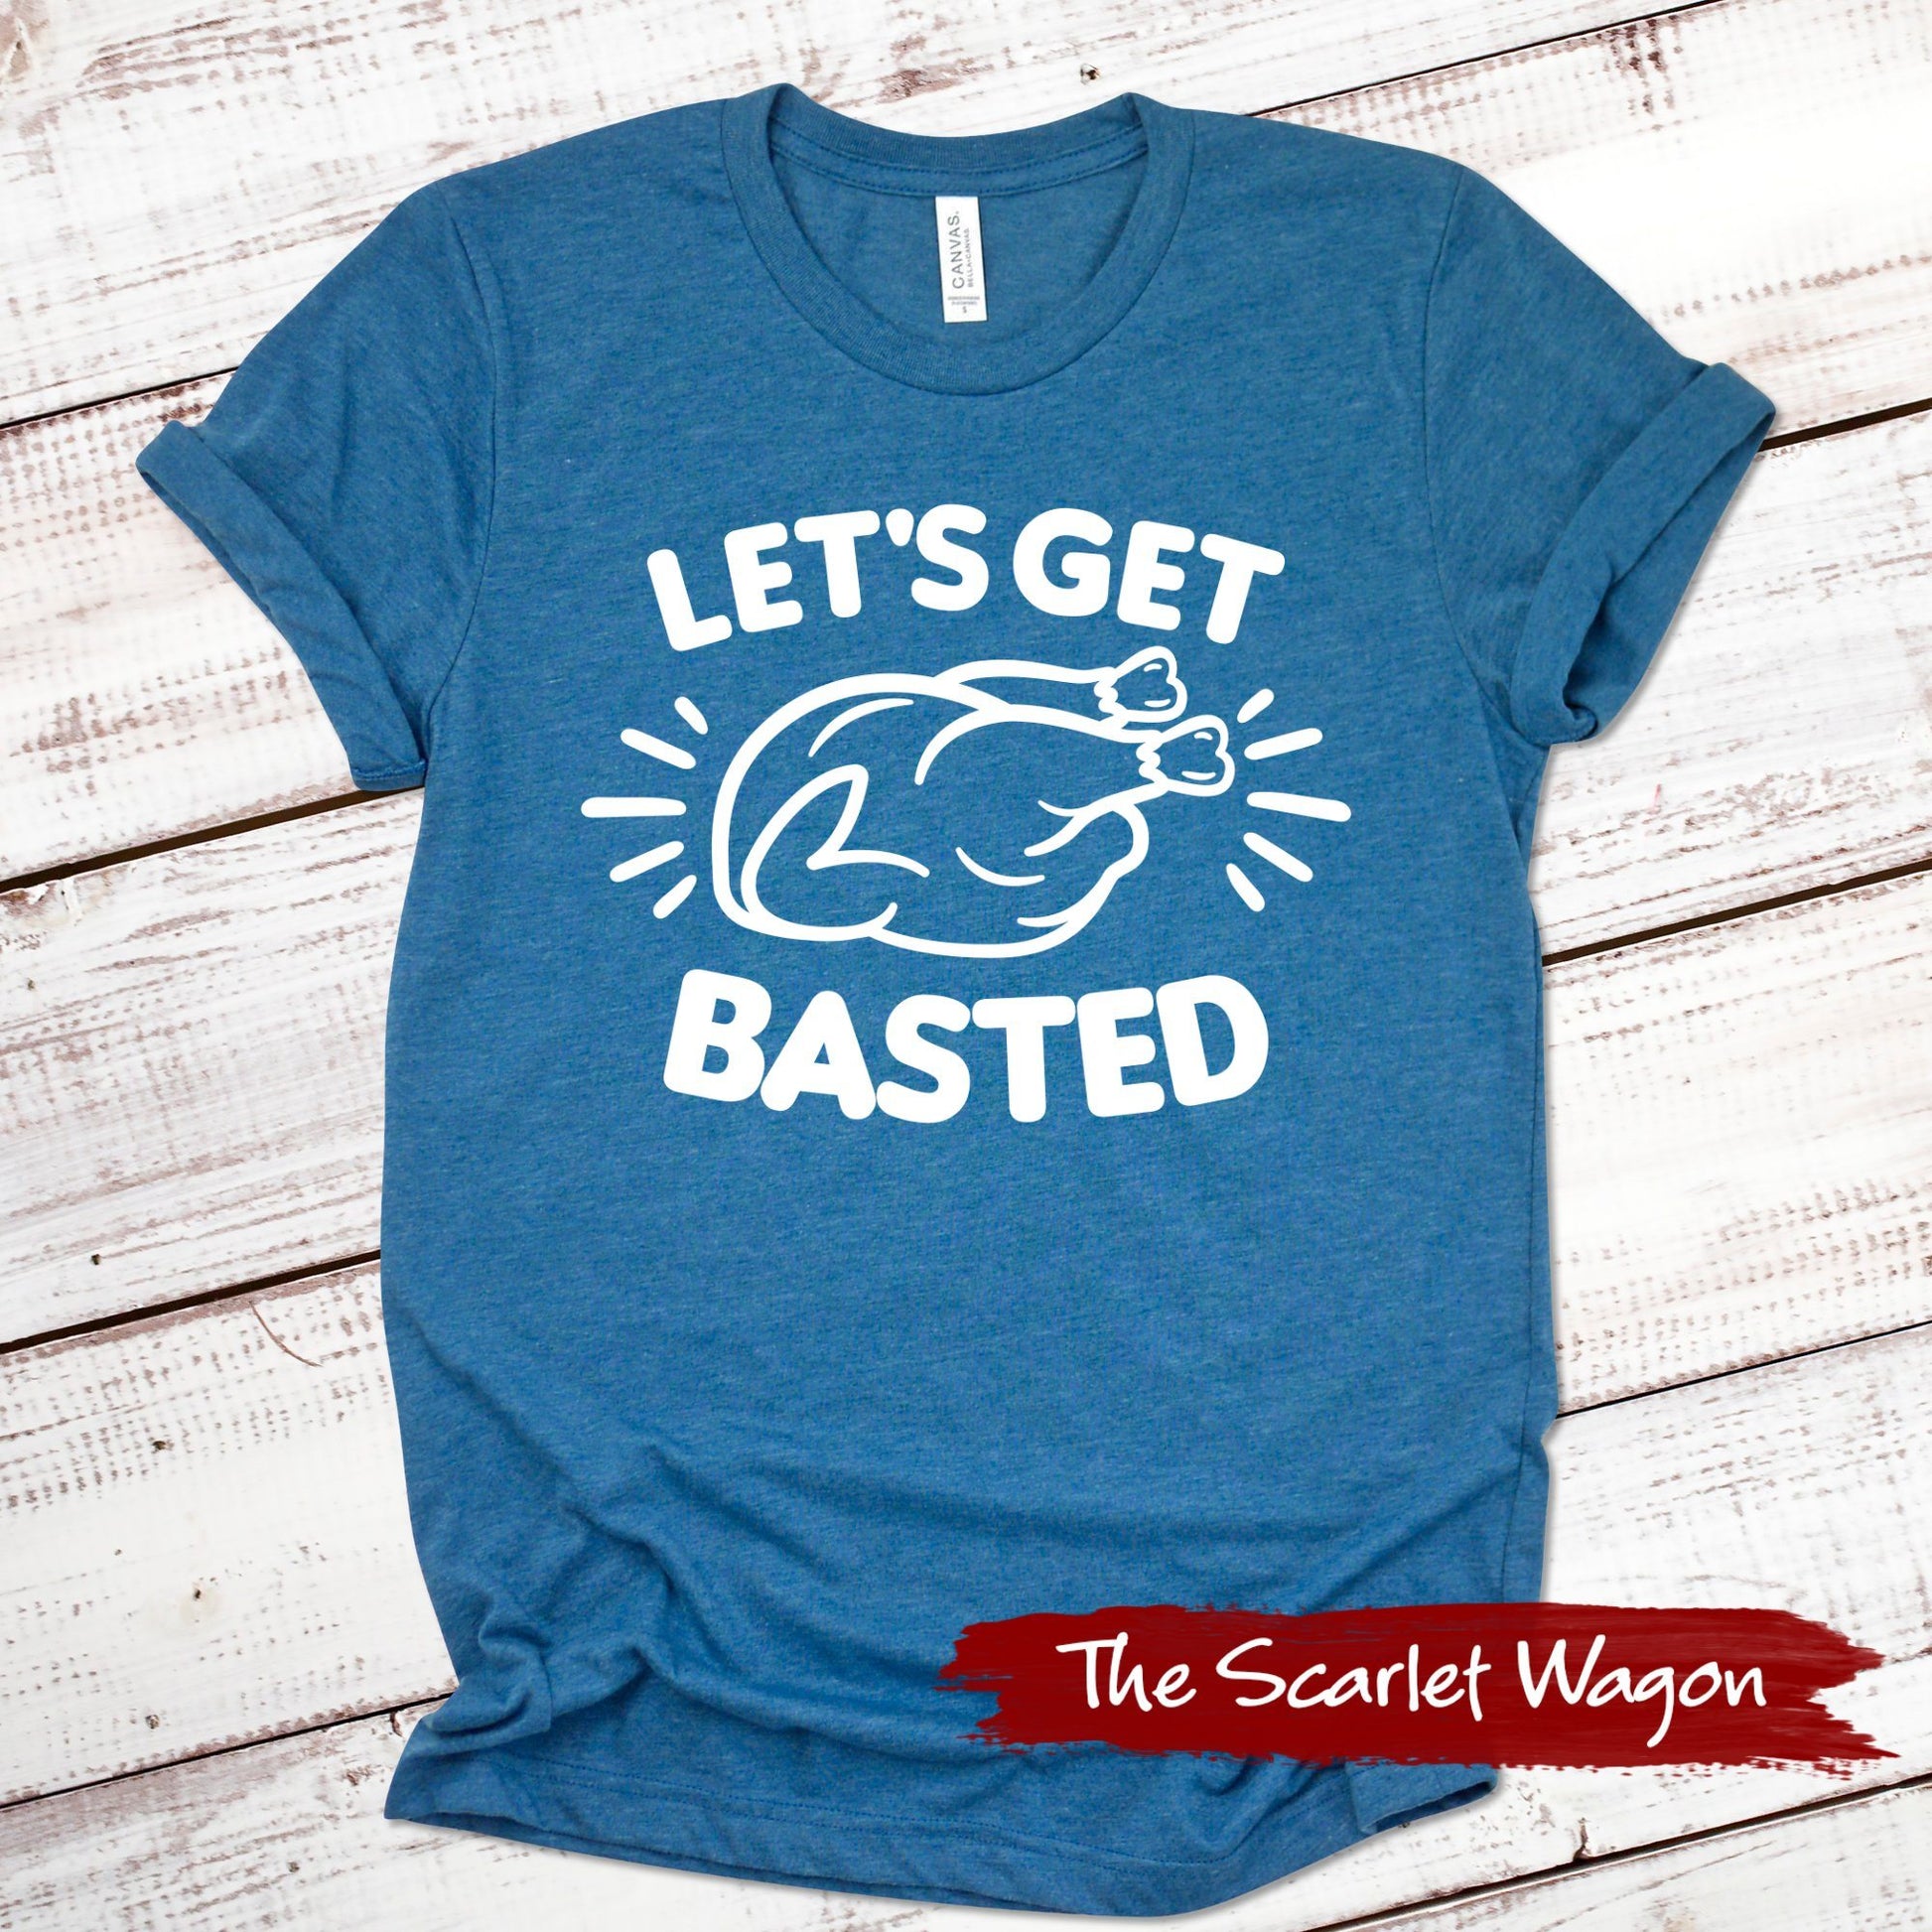 Let's Get Basted Thanksgiving Shirt Scarlet Wagon Heather Deep Teal XS 